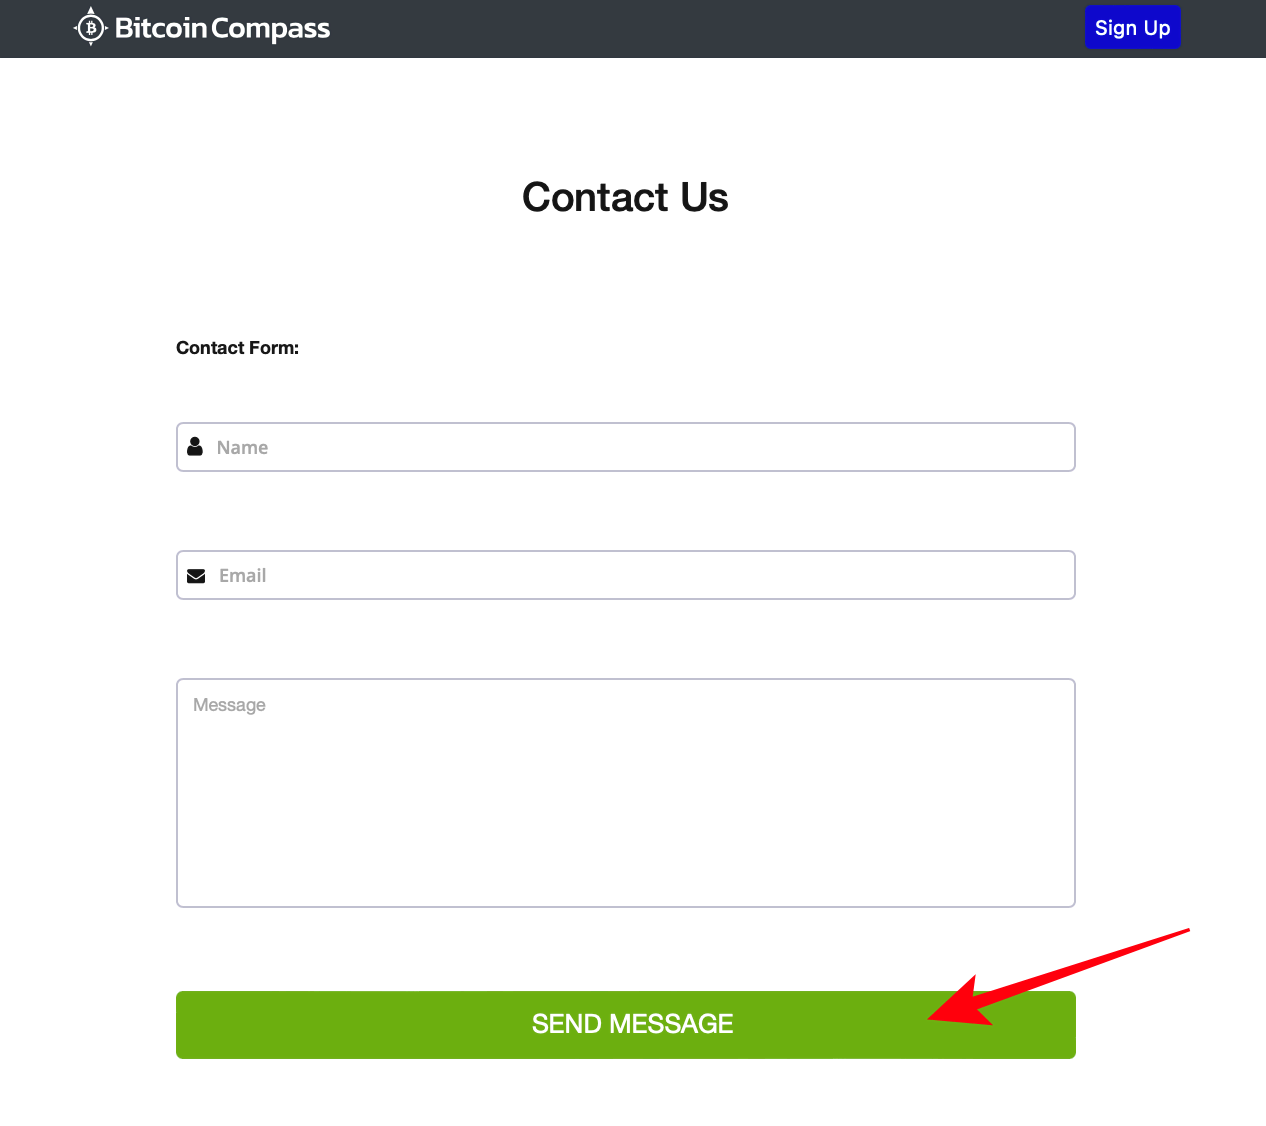 How to contact the customer support of Bitcoin Compass